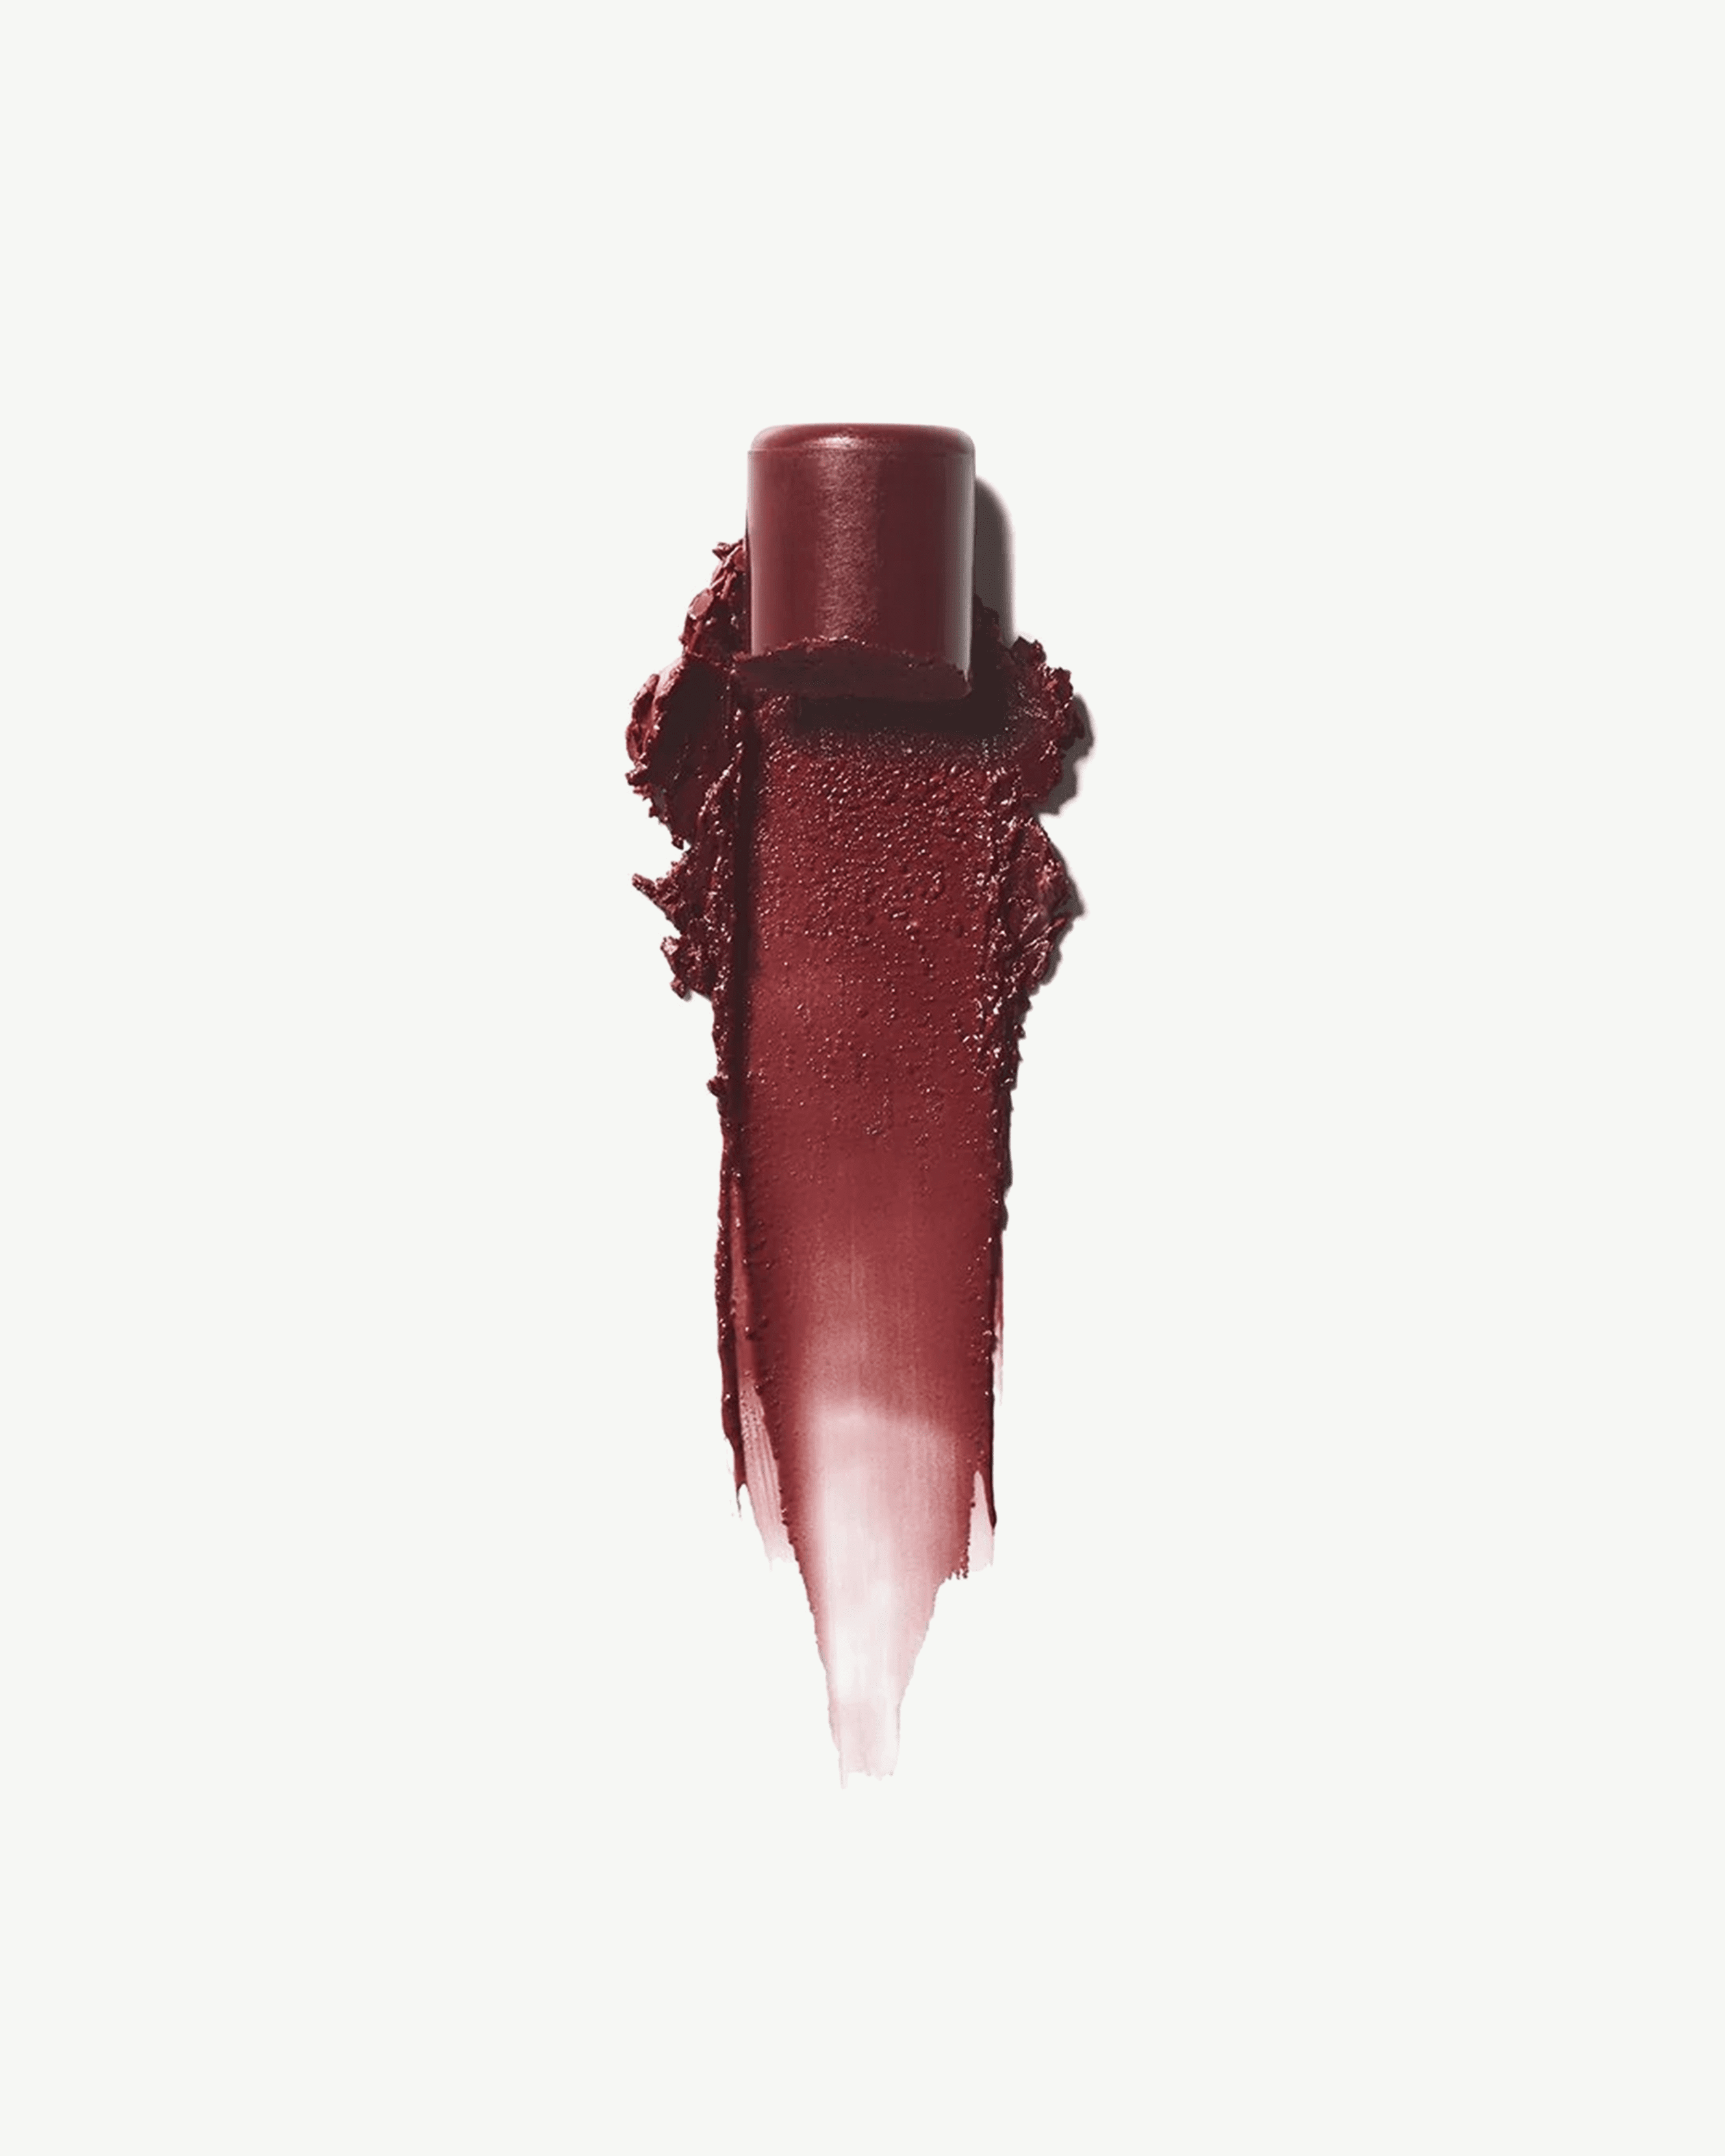 Lady (cranberry with neutral undertones)